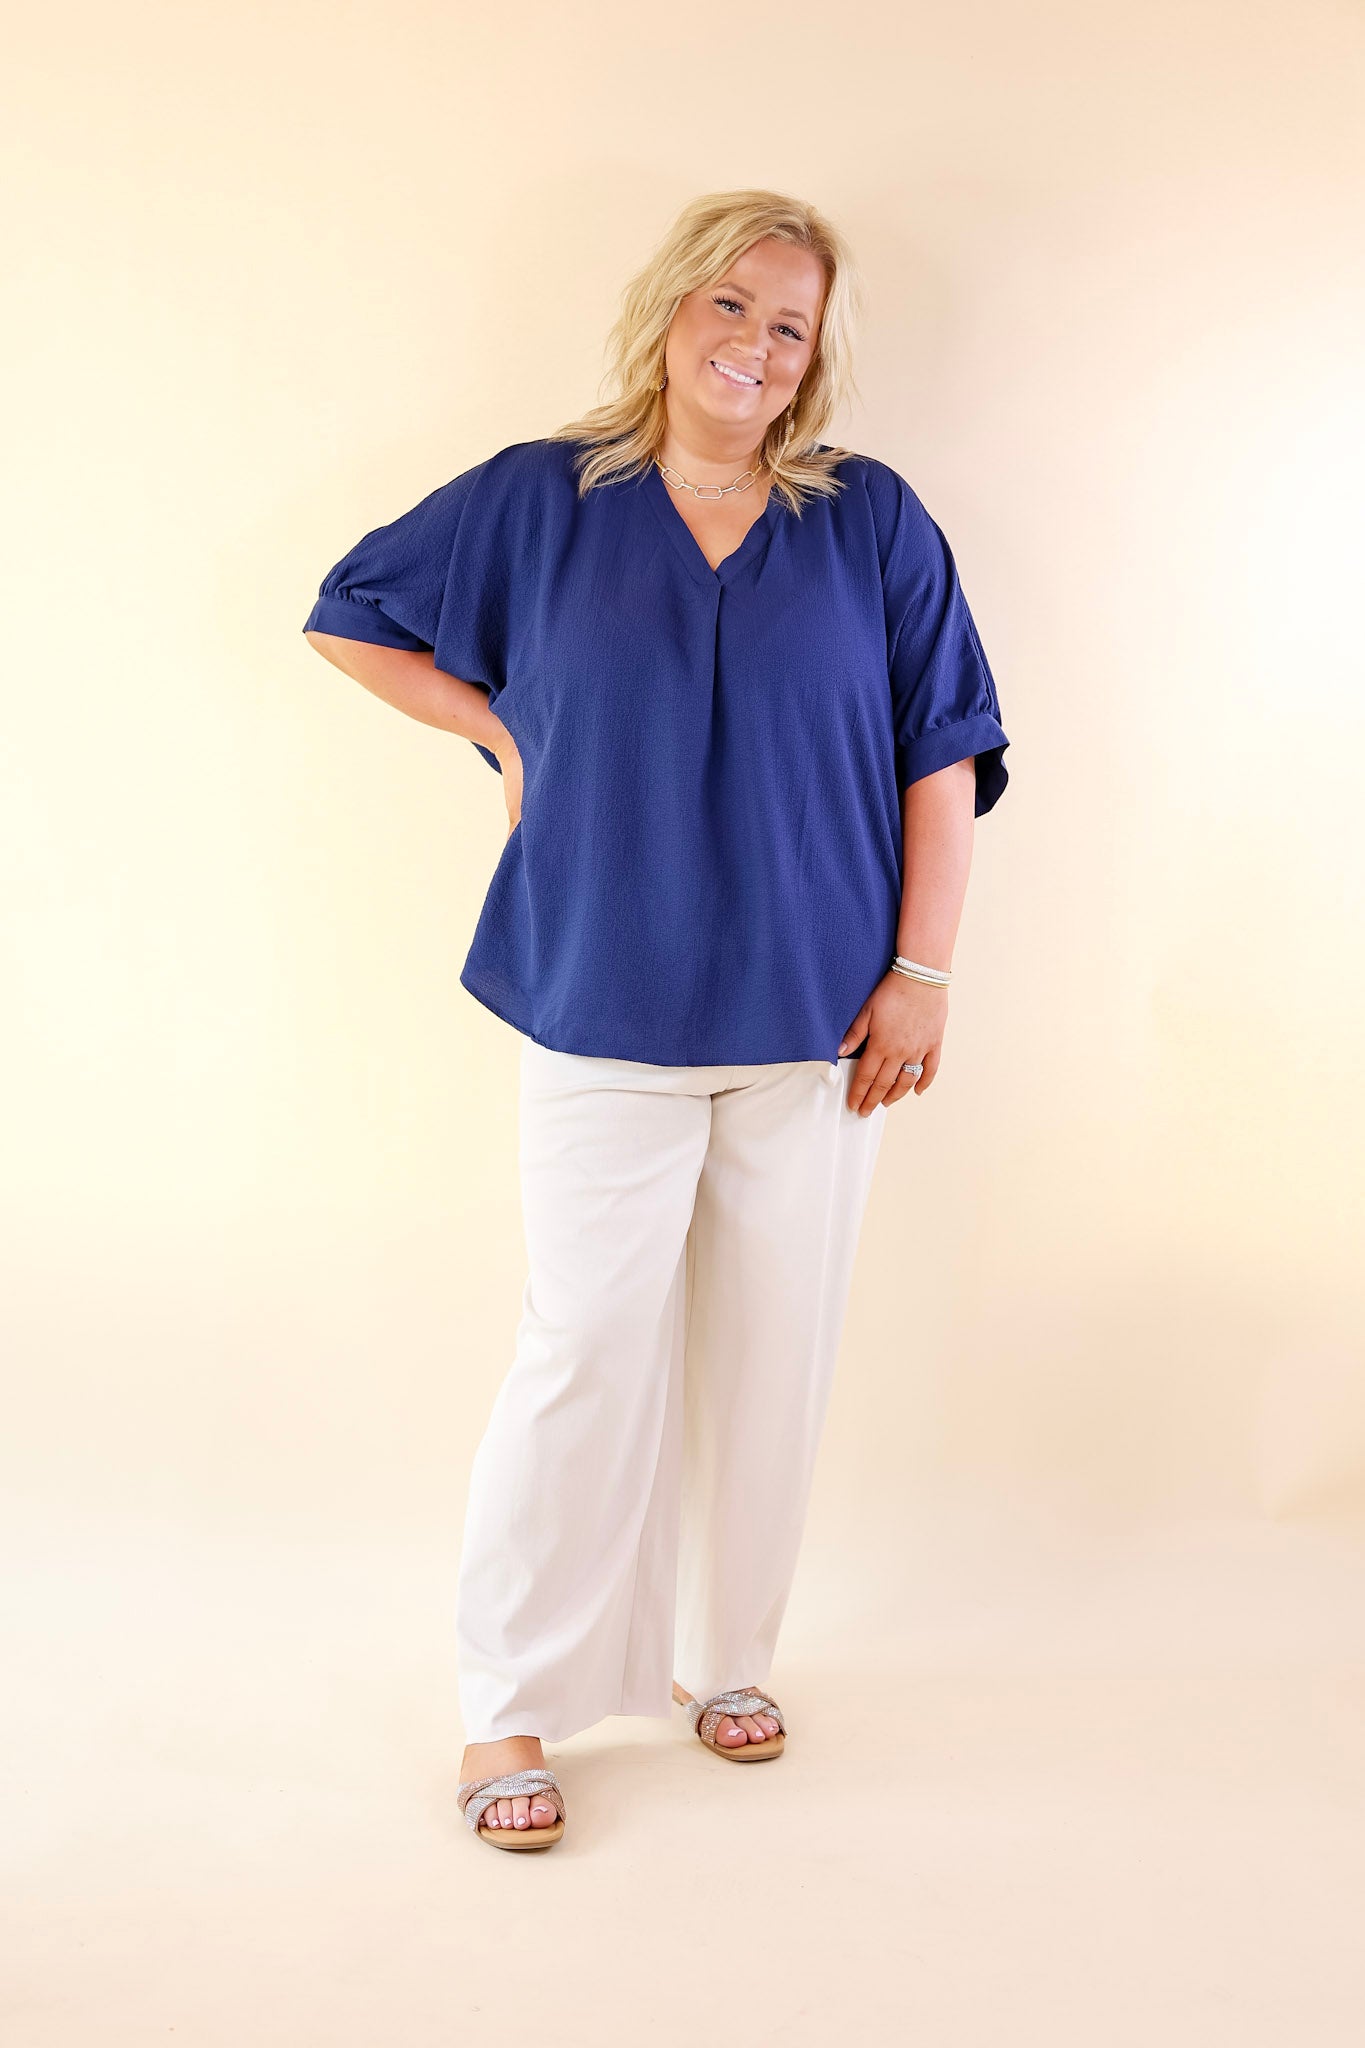 Chic and Charming V Neck Top with 3/4 Sleeves in Navy Blue - Giddy Up Glamour Boutique